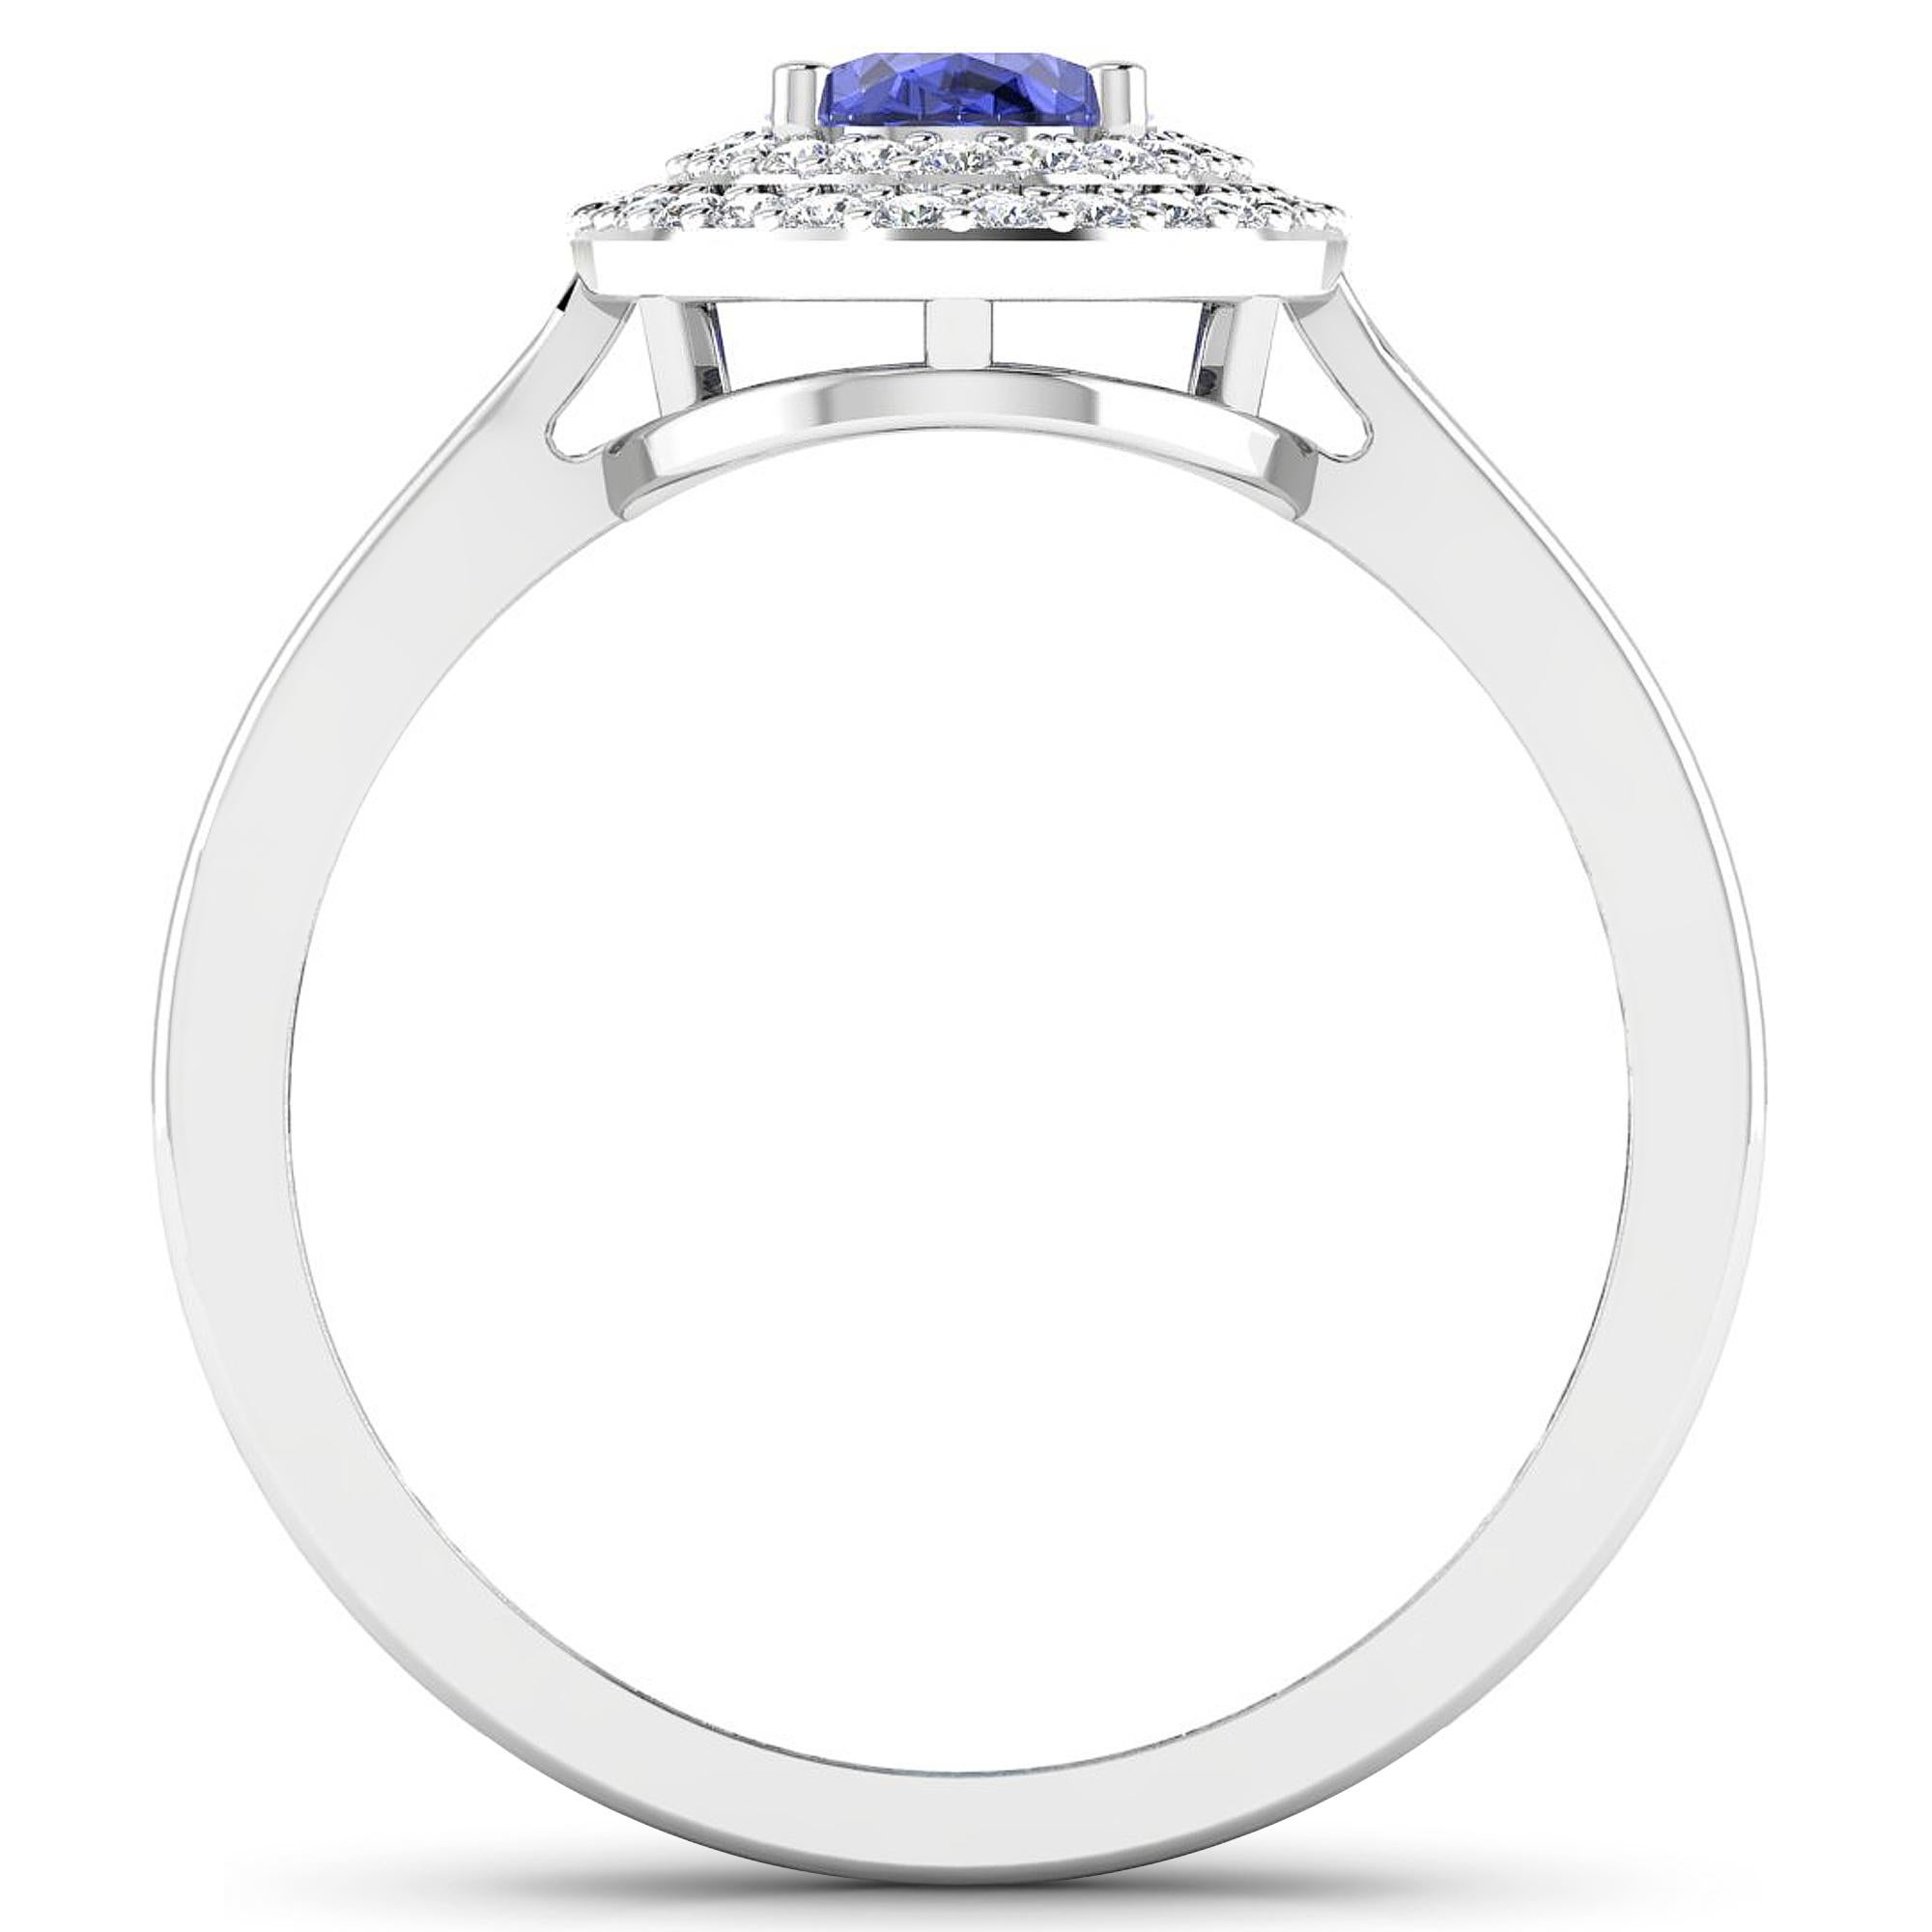 Tanzanite Gold Ring, 14Kt Gold Tanzanite & Diamond Engagement Ring, 0.91ctw.

Flaunt yourself with this 14K White Gold Tanzanite & White Diamond Engagement Ring. The setting is inlaid with 46 accented full-cut White Diamond round stones for a total